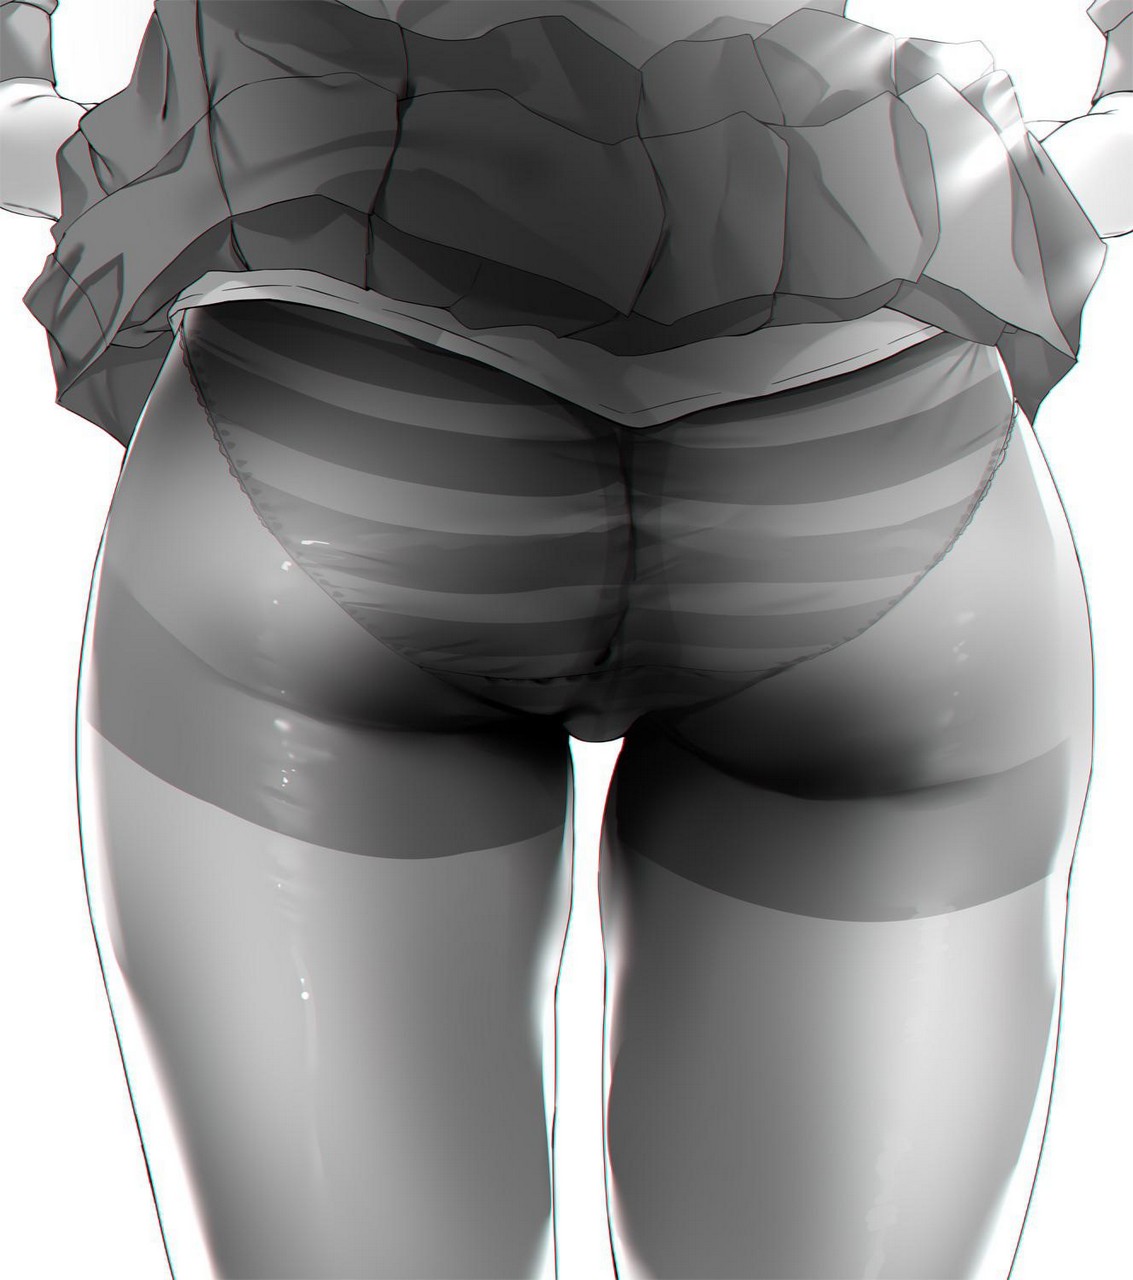 Monochrome Greatness Thighdeology